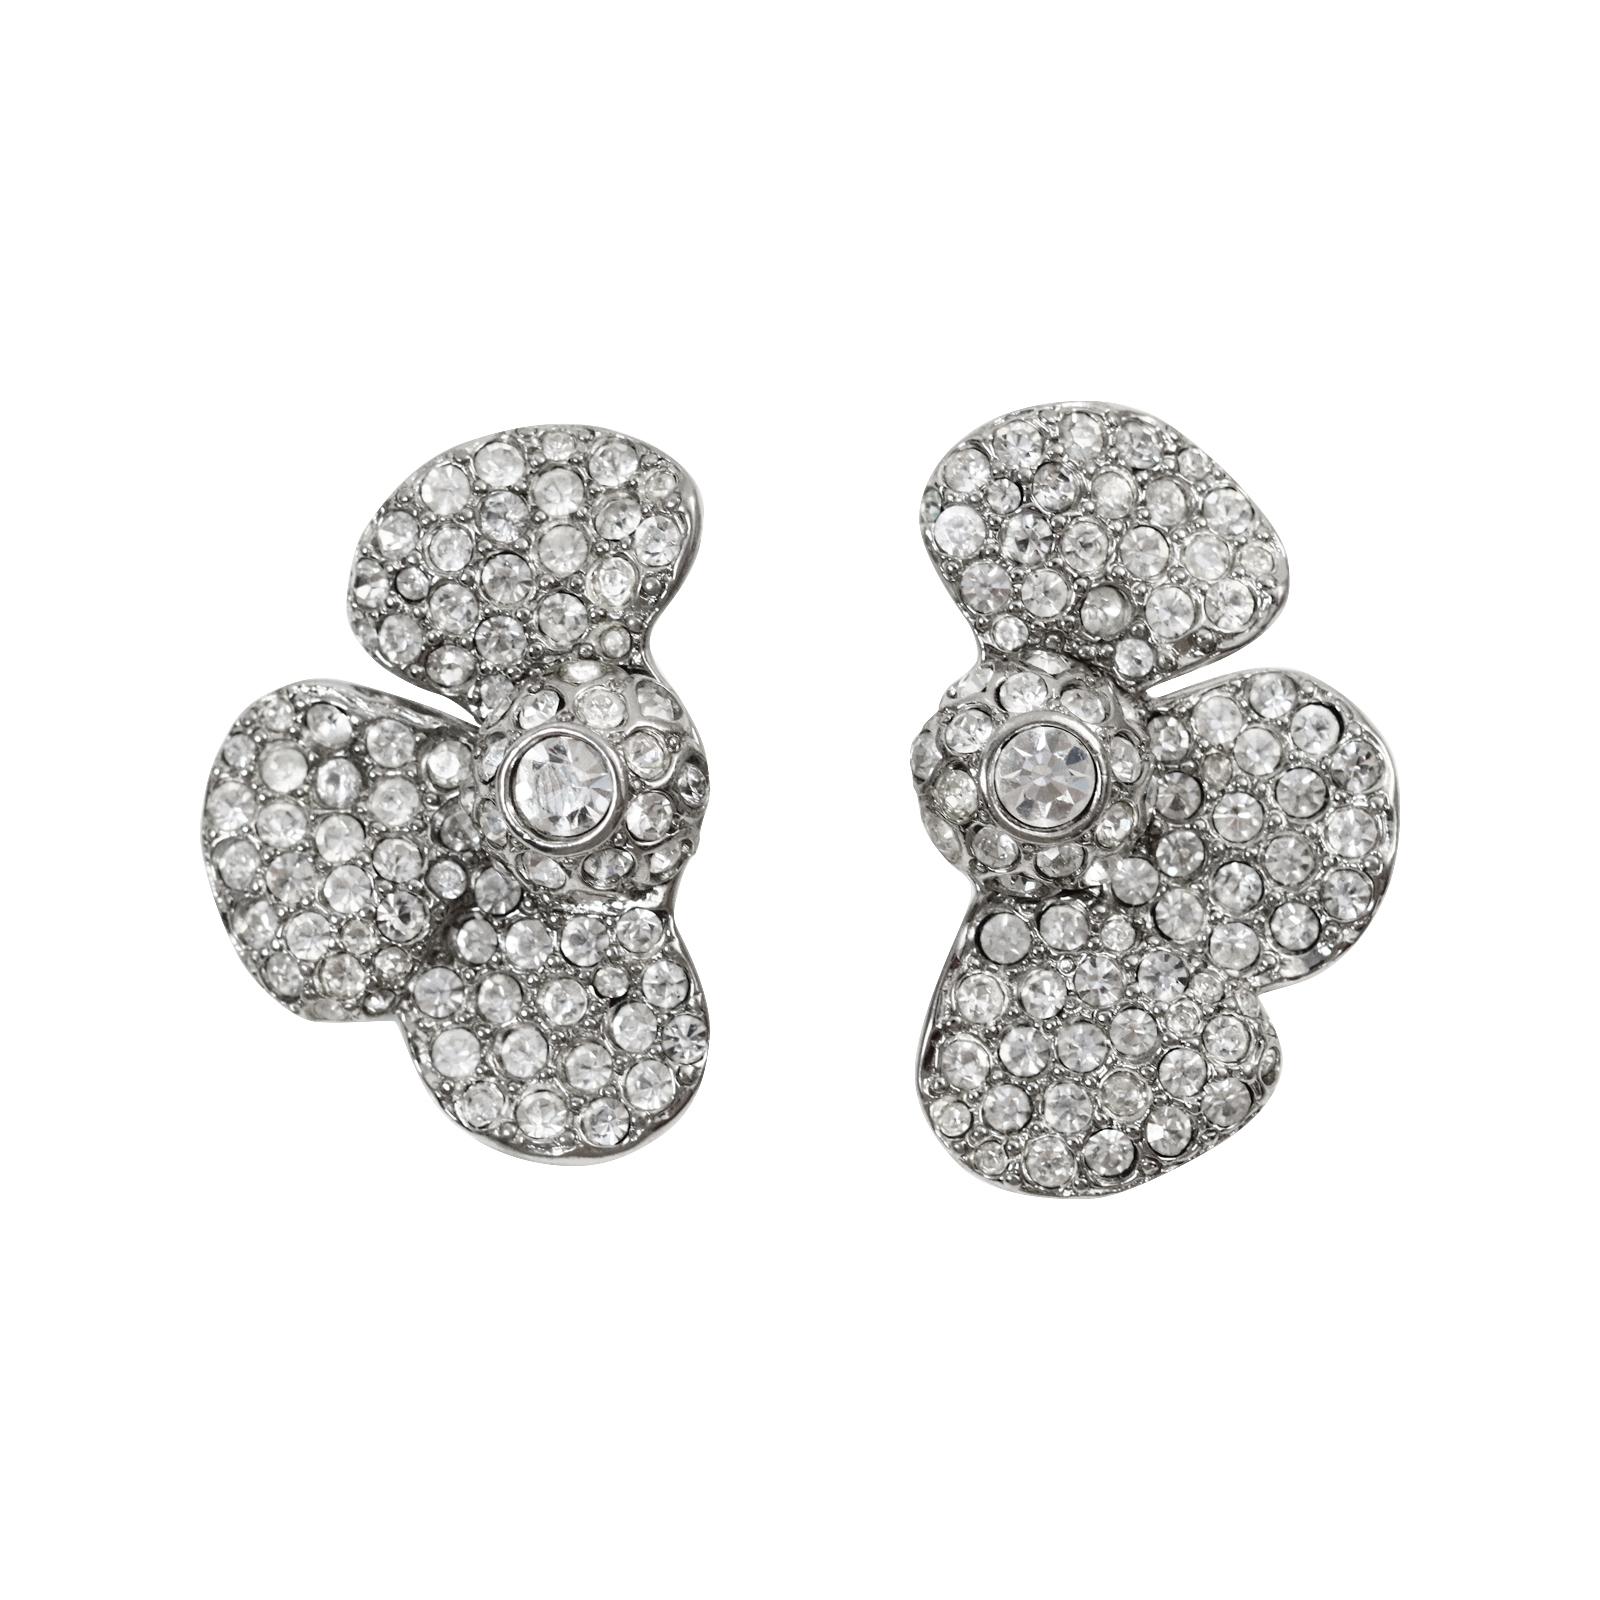 Vintage Yves Saint Laurent YSL Diamante Half Flower Earrings Circa 1980s. These earrings are a Flower that has been cut in half.  There is a specific one for the left and one for the right so they fit close to the ear. They are so chic as it is like